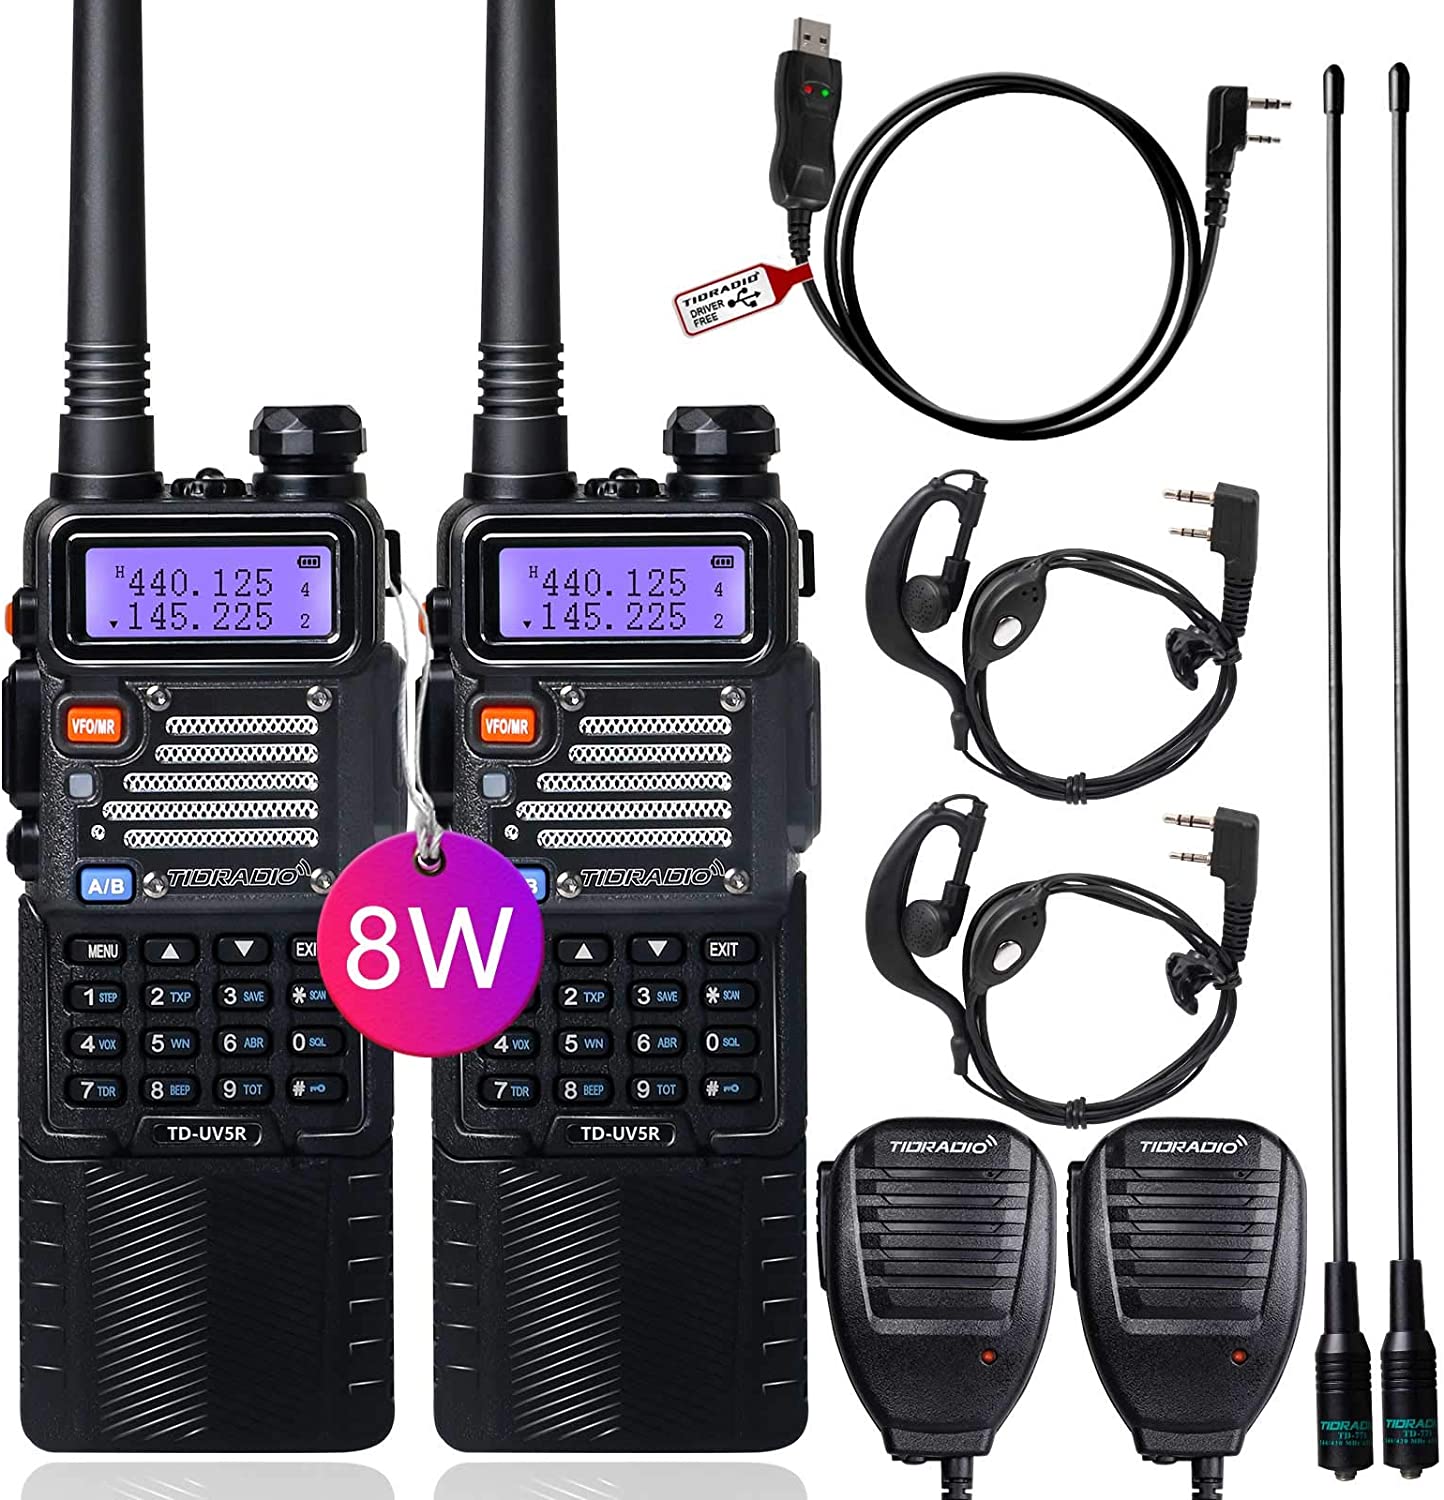 UV-5R Ham Radio Handheld High Power Two Way Radio with Driver Free Programming Cable and 3800mAh Battery Includes Full Kit Walkie Talkie (2Pack) $62.22